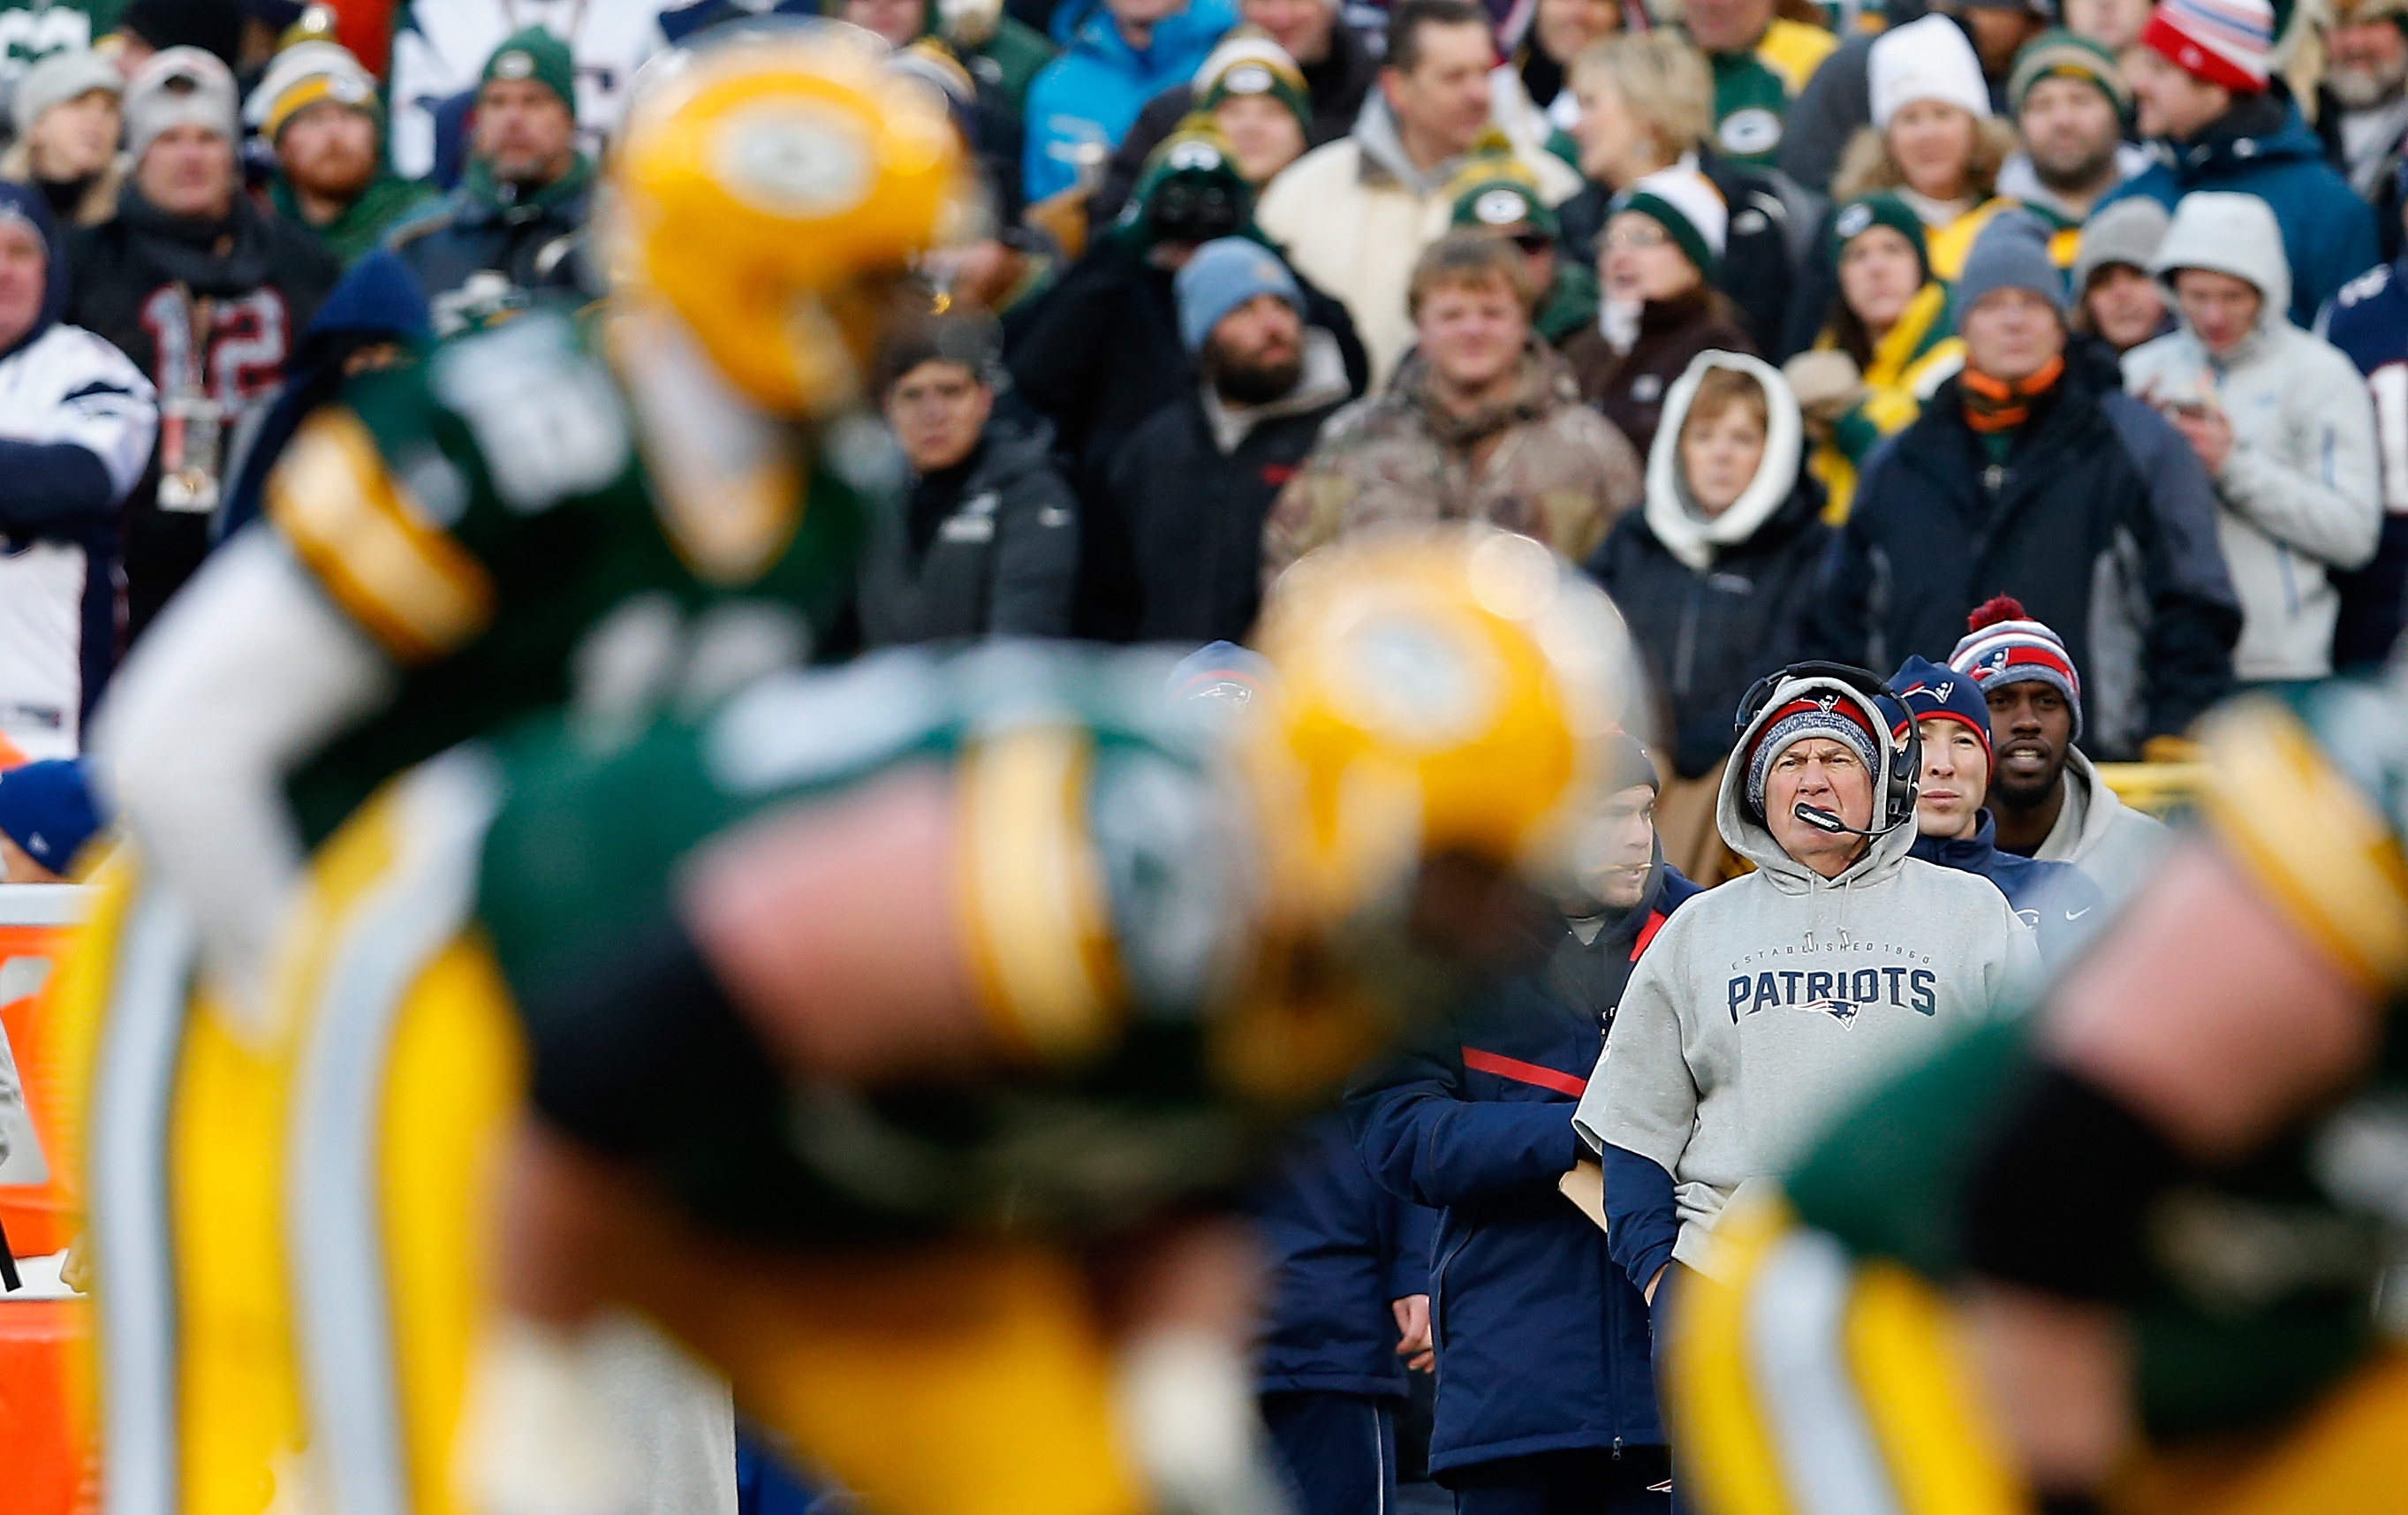 Head coach Bill Belichick of the New England Patriots looks on as quarterback Aaron Rodgers of the Green Bay Packers snaps the football.